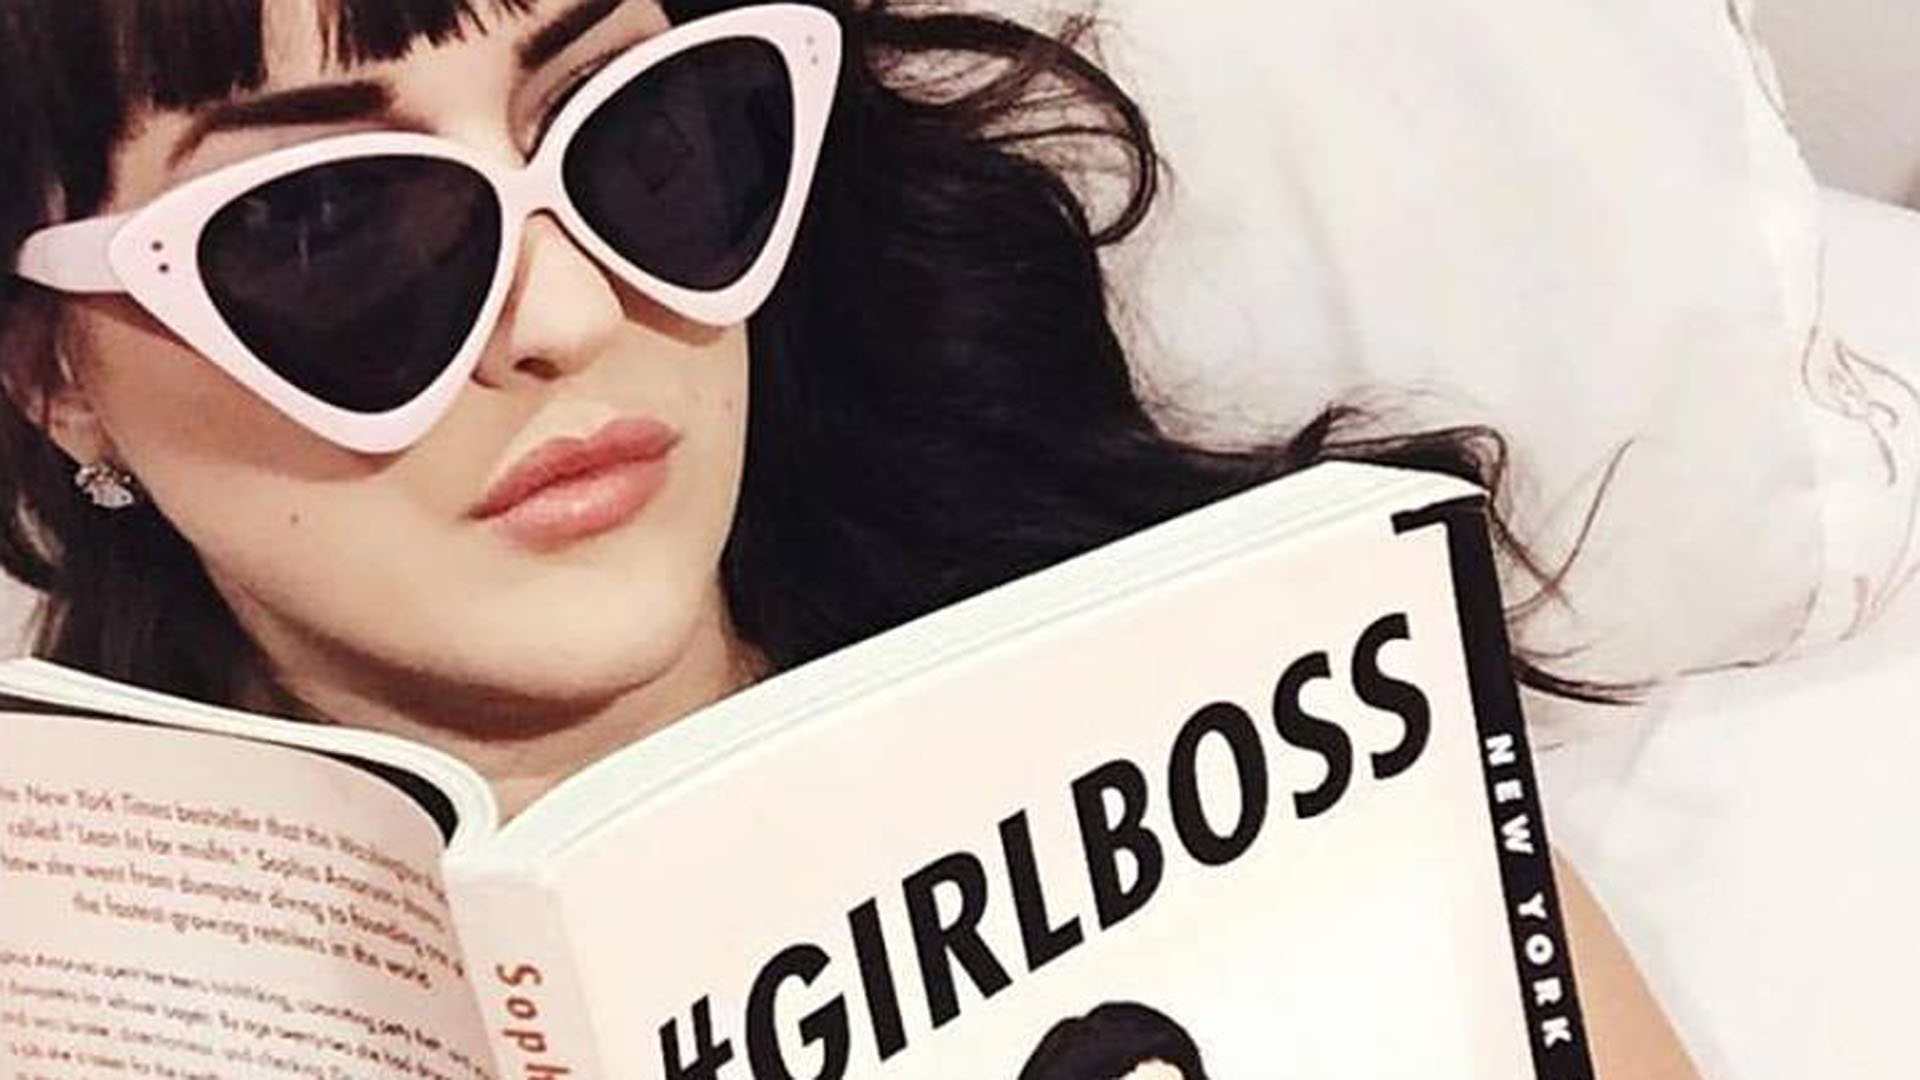 Sophia Amoruso: ‘Traditional Career Paths Aren’t for Everyone.’